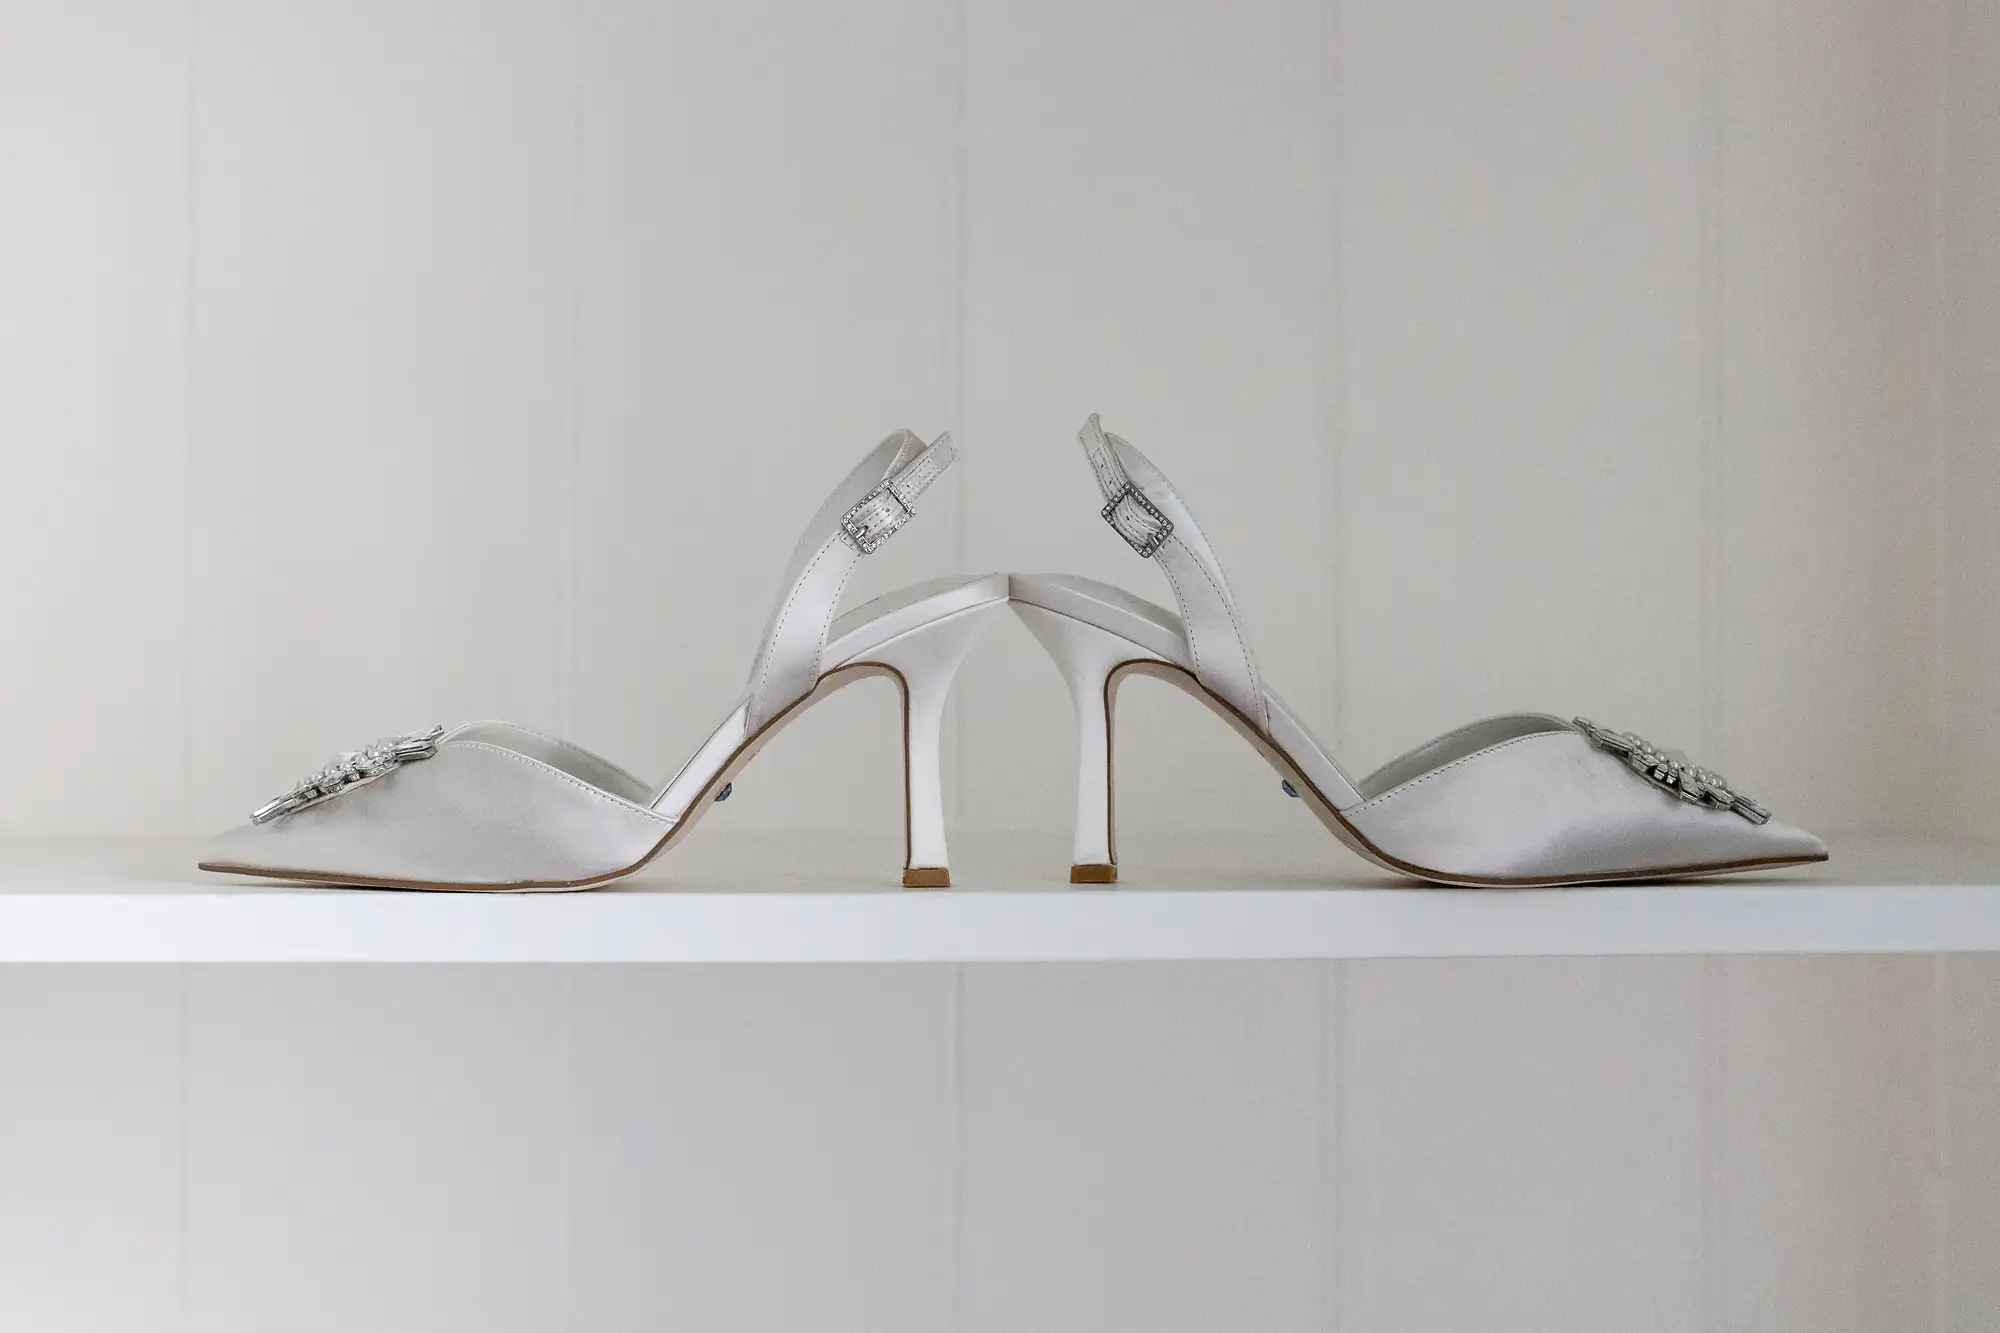 A pair of elegant white high-heeled sandals with sparkling gemstone embellishments on the straps, displayed on a white shelf.